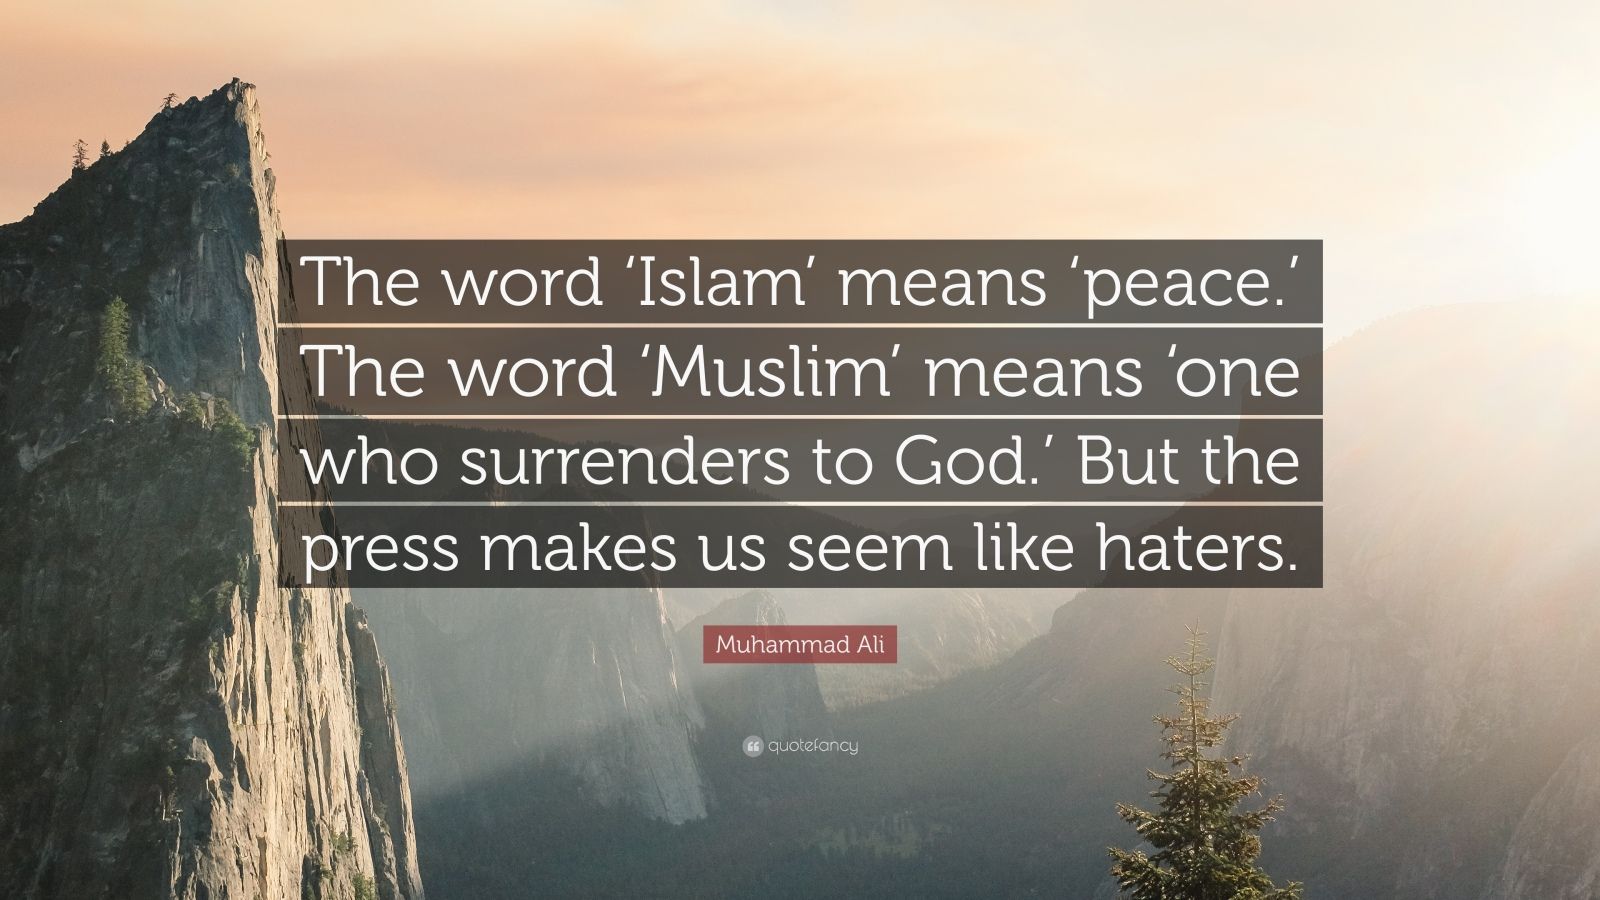 Muhammad Ali Quote: “The word ‘Islam’ means ‘peace.’ The word ‘Muslim